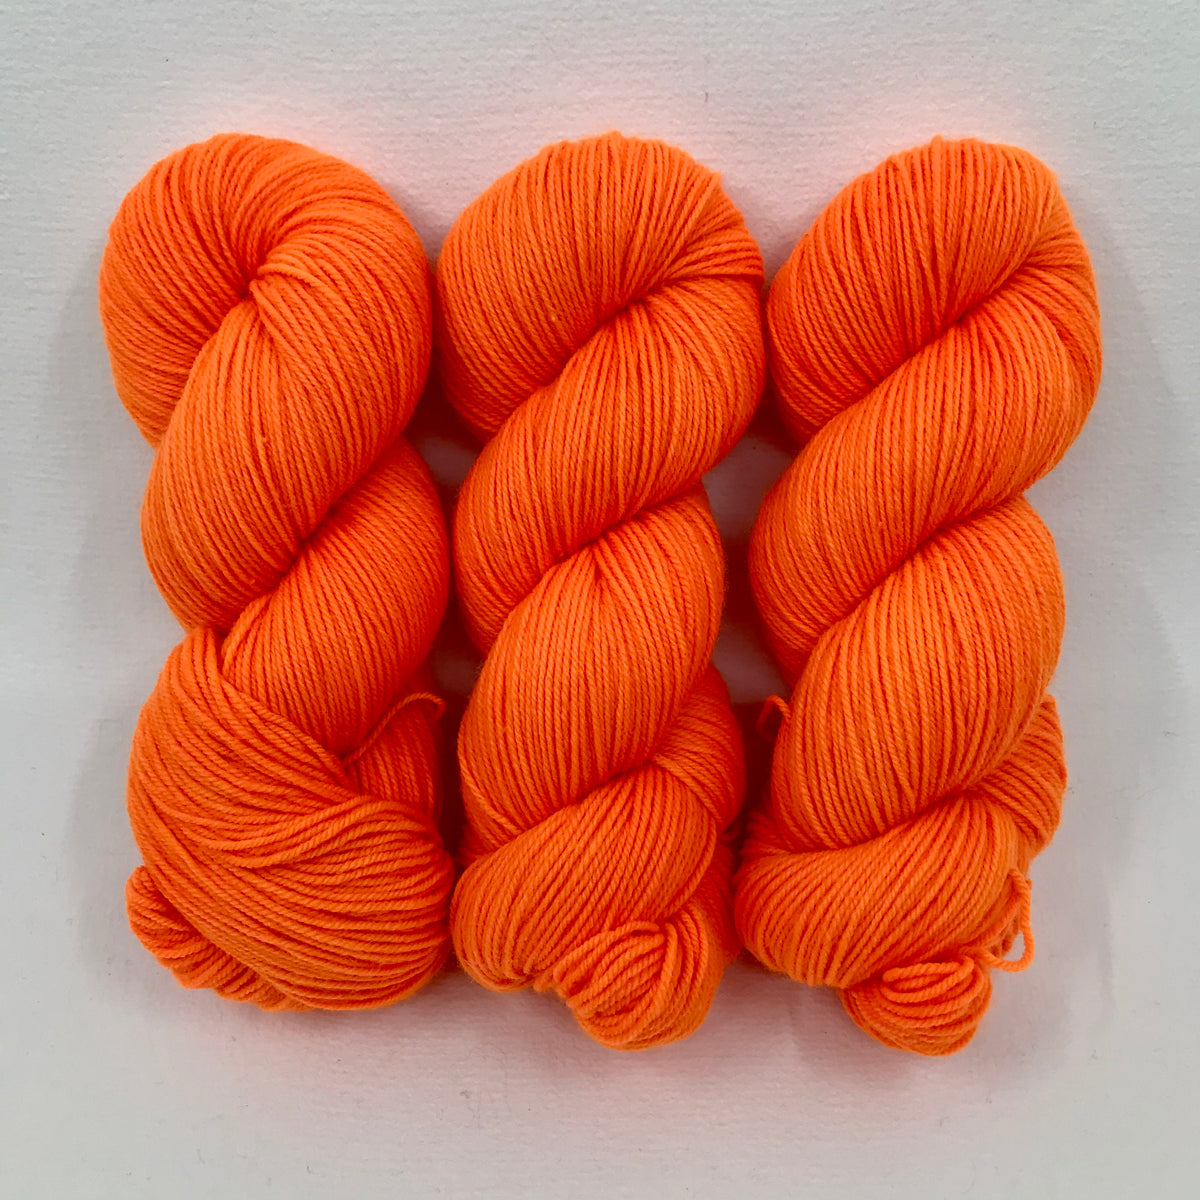 Orange Light Sabre - Revival Worsted - Dyed Stock